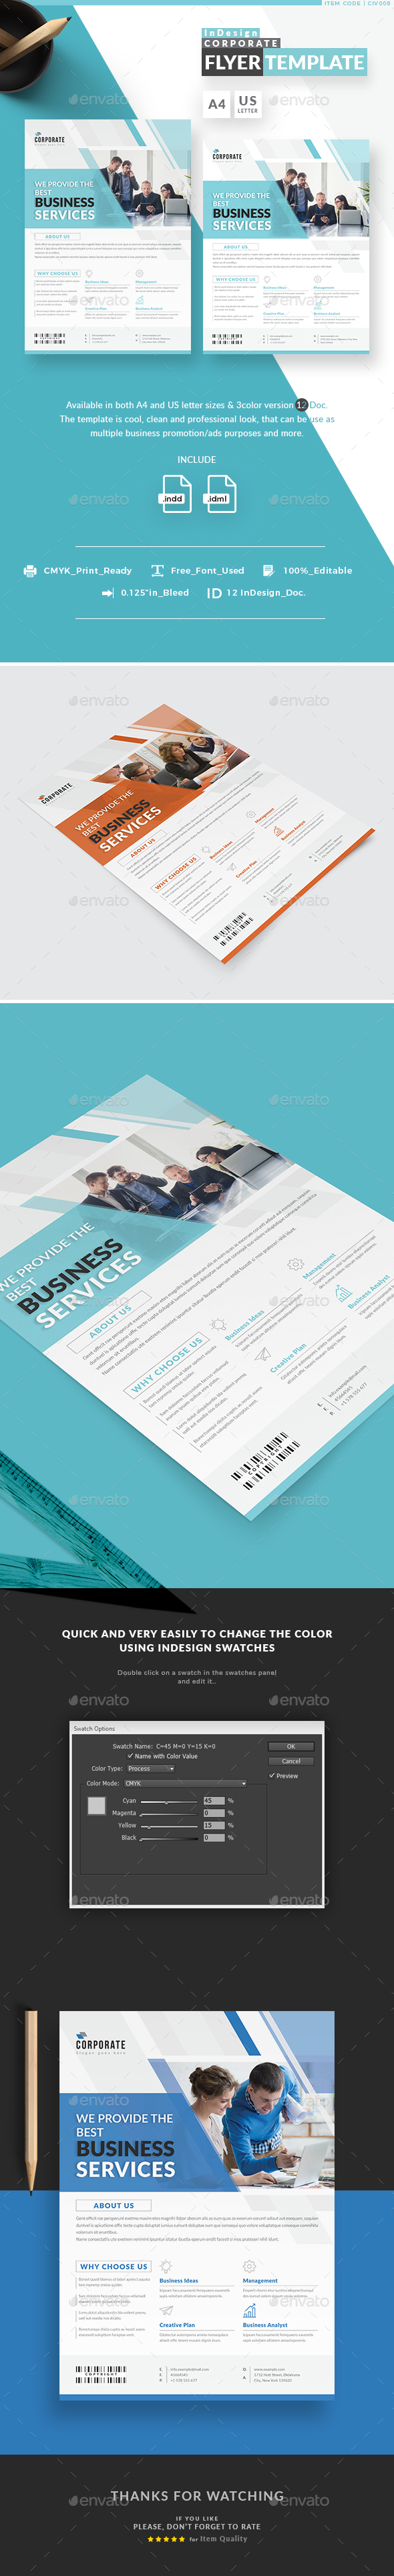 InDesign Corporate Flyer Templates